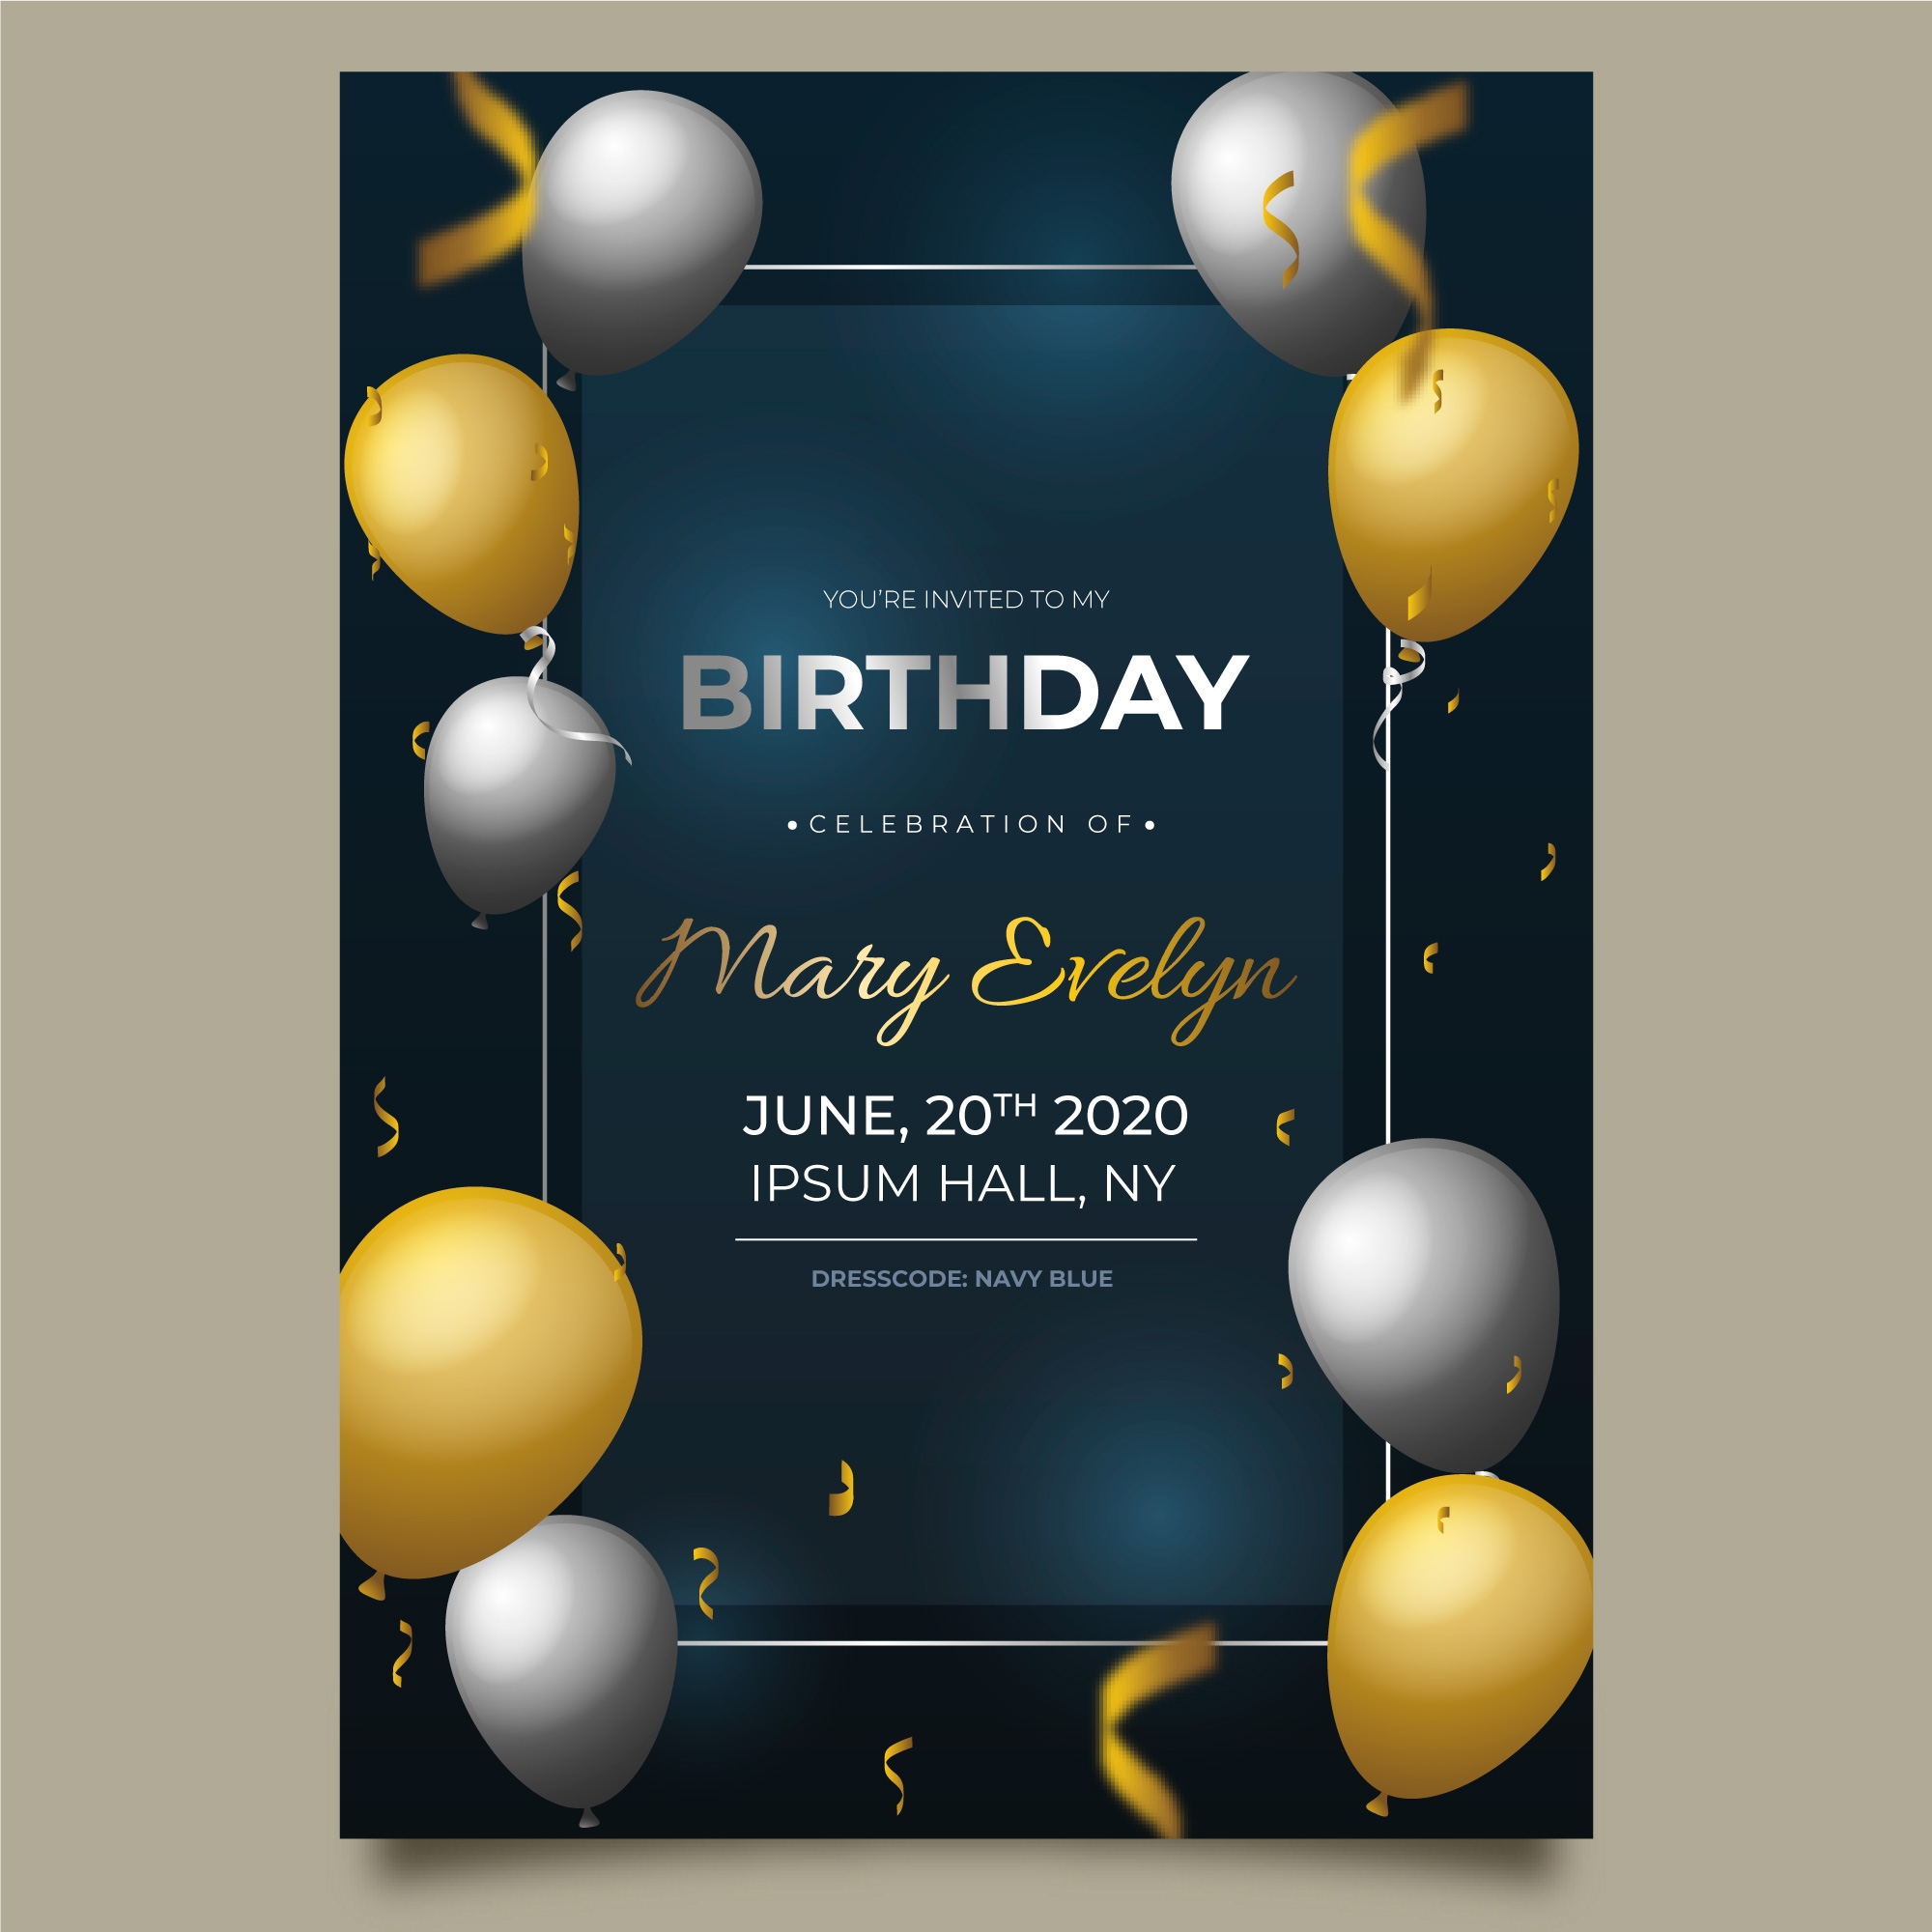 Happy Birthday Card with 3d Balloons